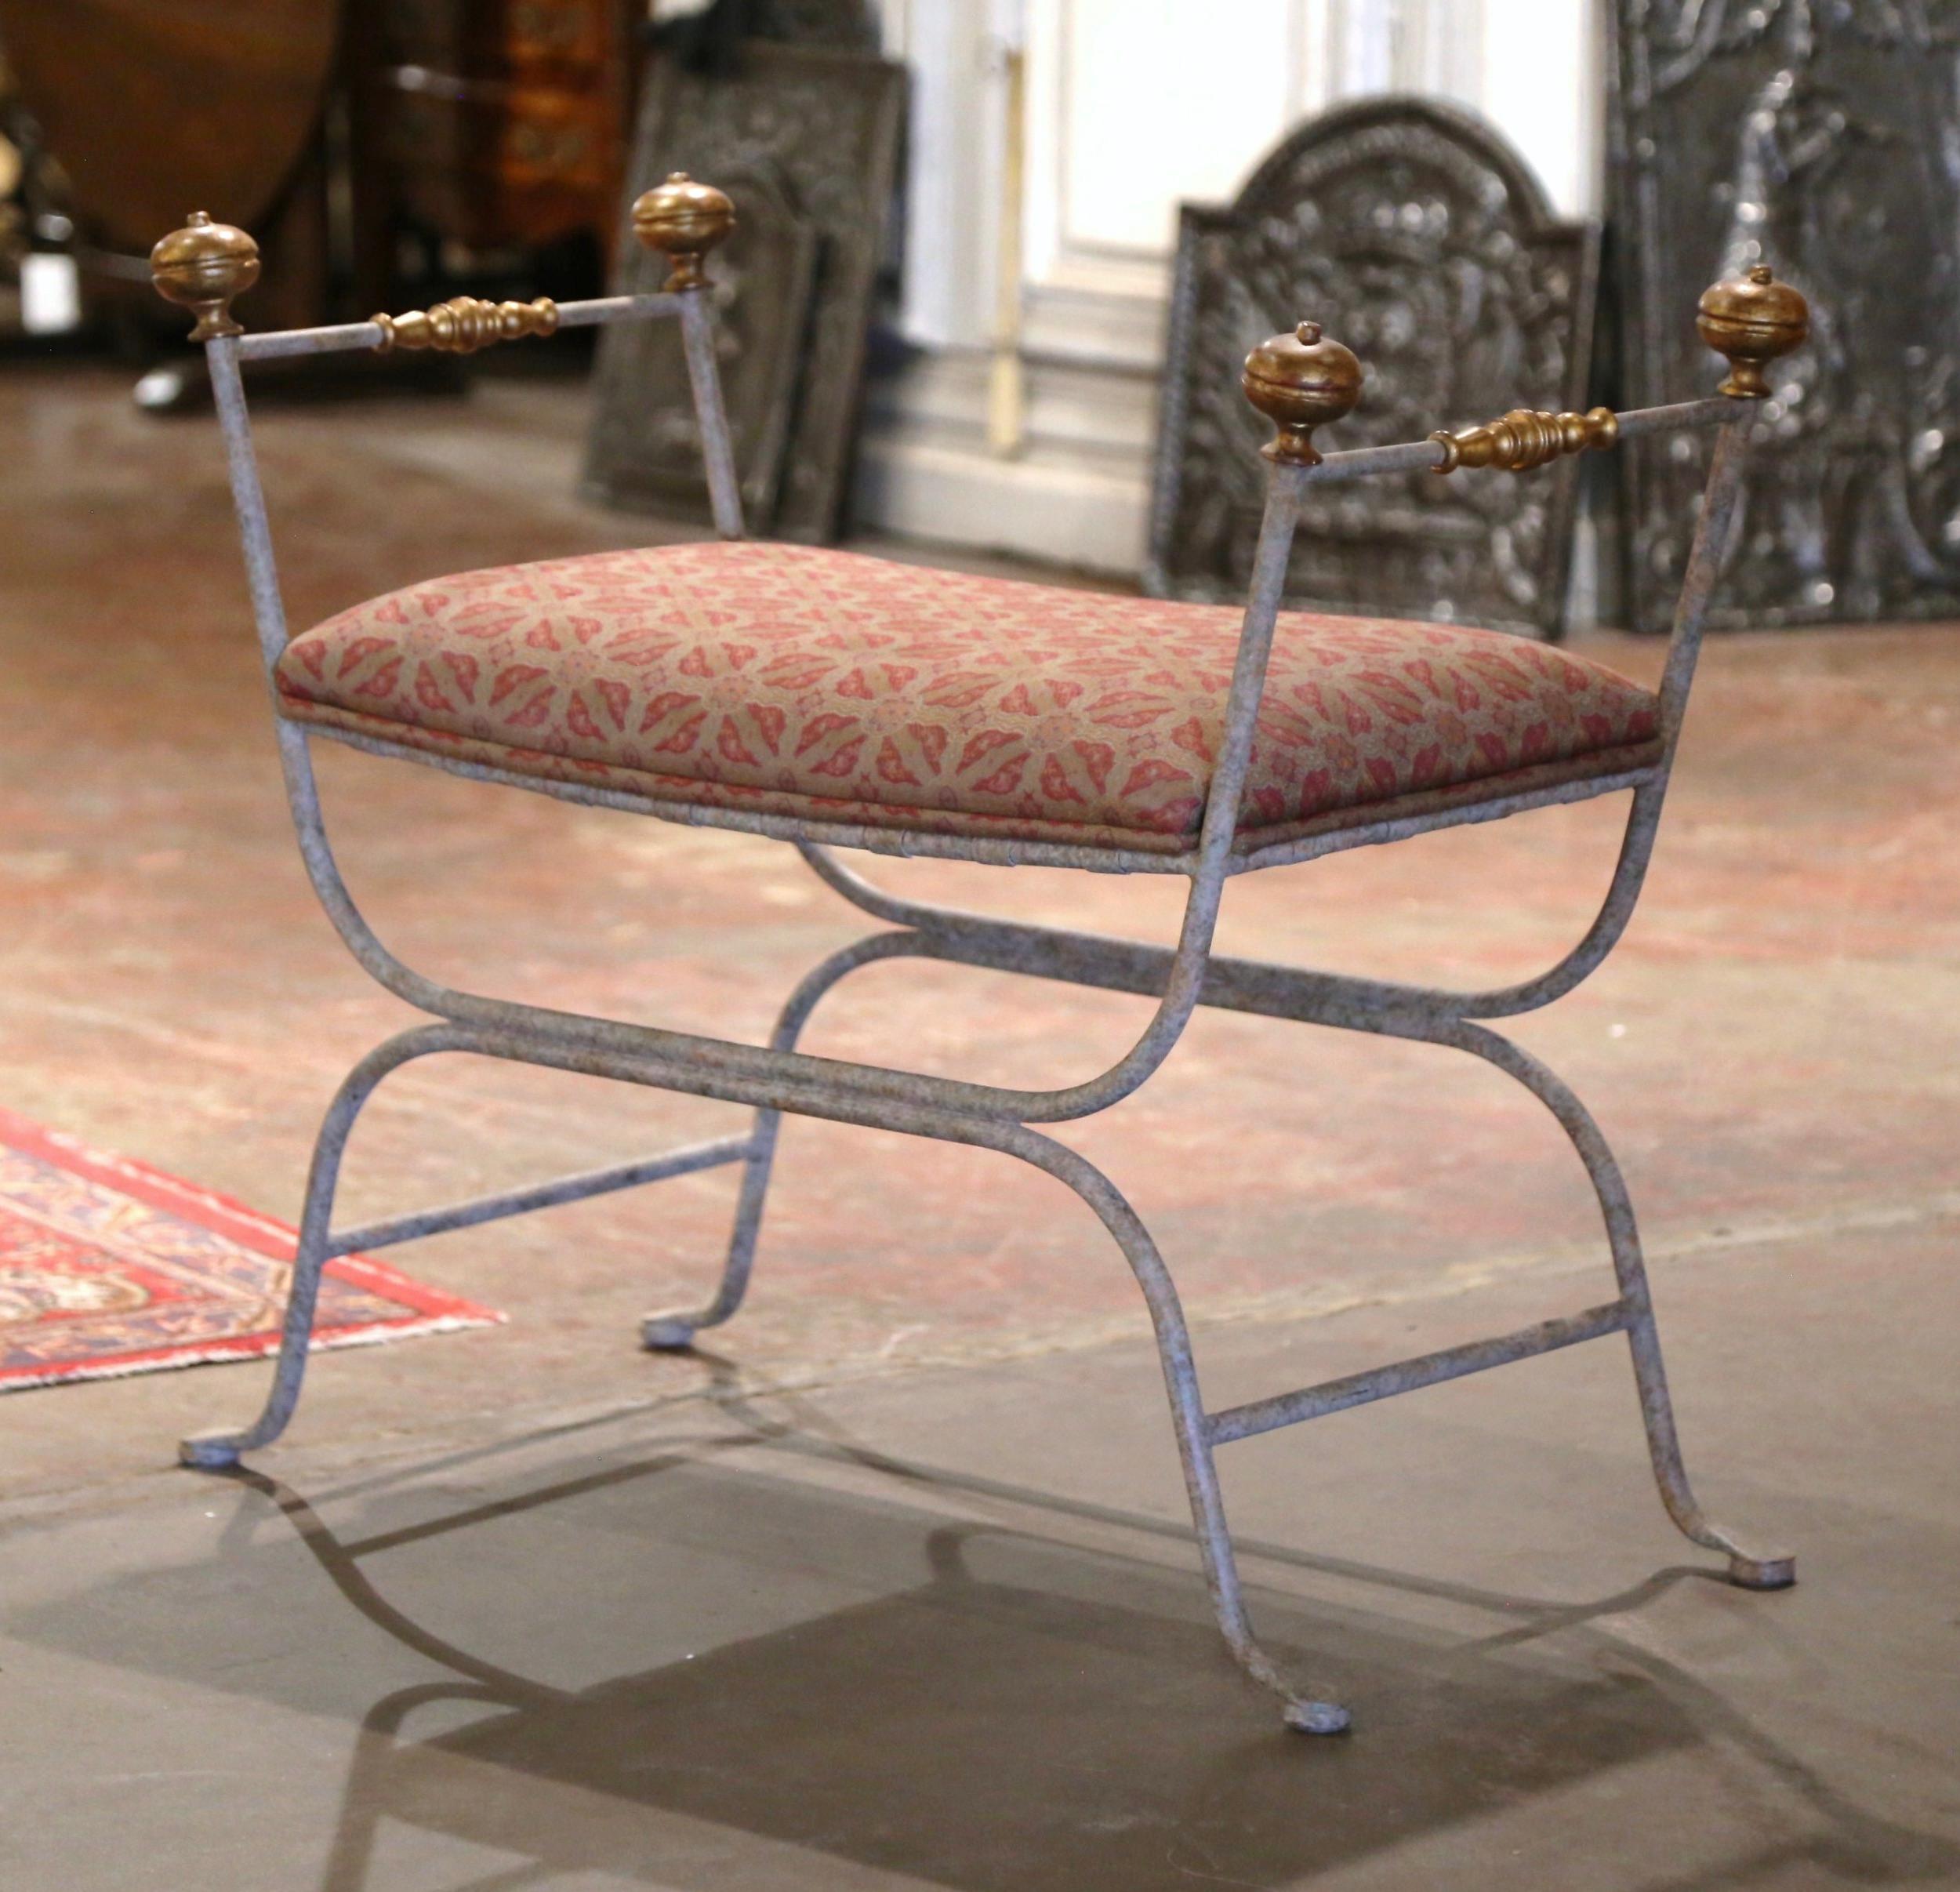 This elegant, antique Campaign bench was created in Italy, circa 1970. Made of forged iron, the seating has scrolled legs, and is embellished with decorative bronze rosette finials at each end of both armrests. The seat is upholstered with a thick